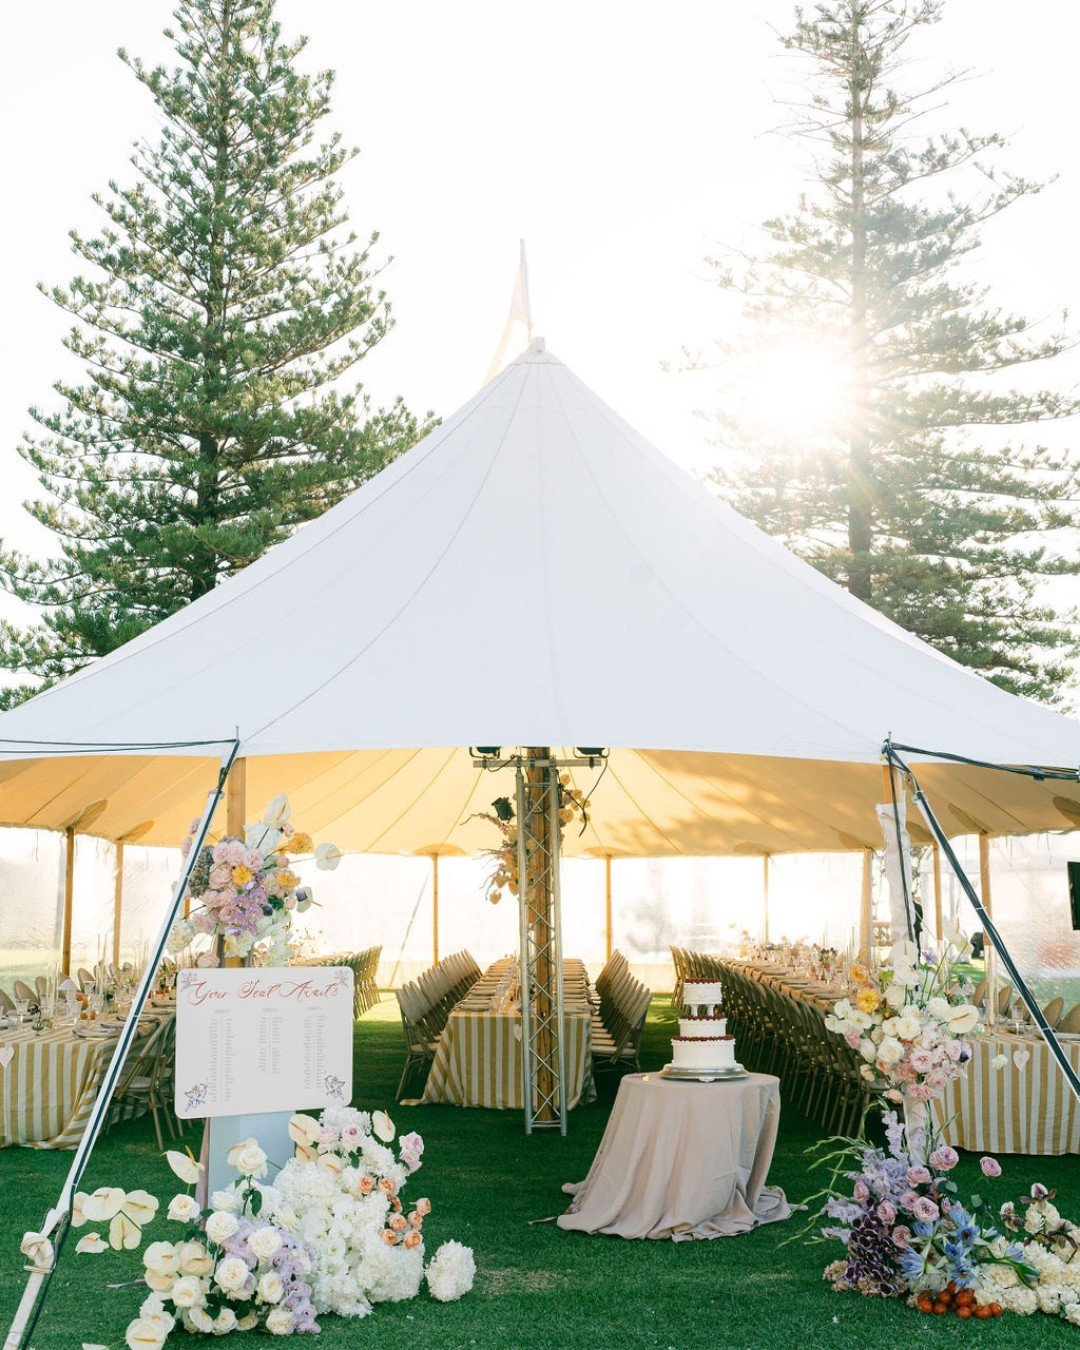 Take us back to Elizabeth + Zivarn&rsquo;s stunning day - with our Sperry Tent in its full golden hour glory 🌻
ㅤ
// Created by the talented team //
&mdash;--------------------------------------------
Photography by @_westerly
Florals @hellocharlotte